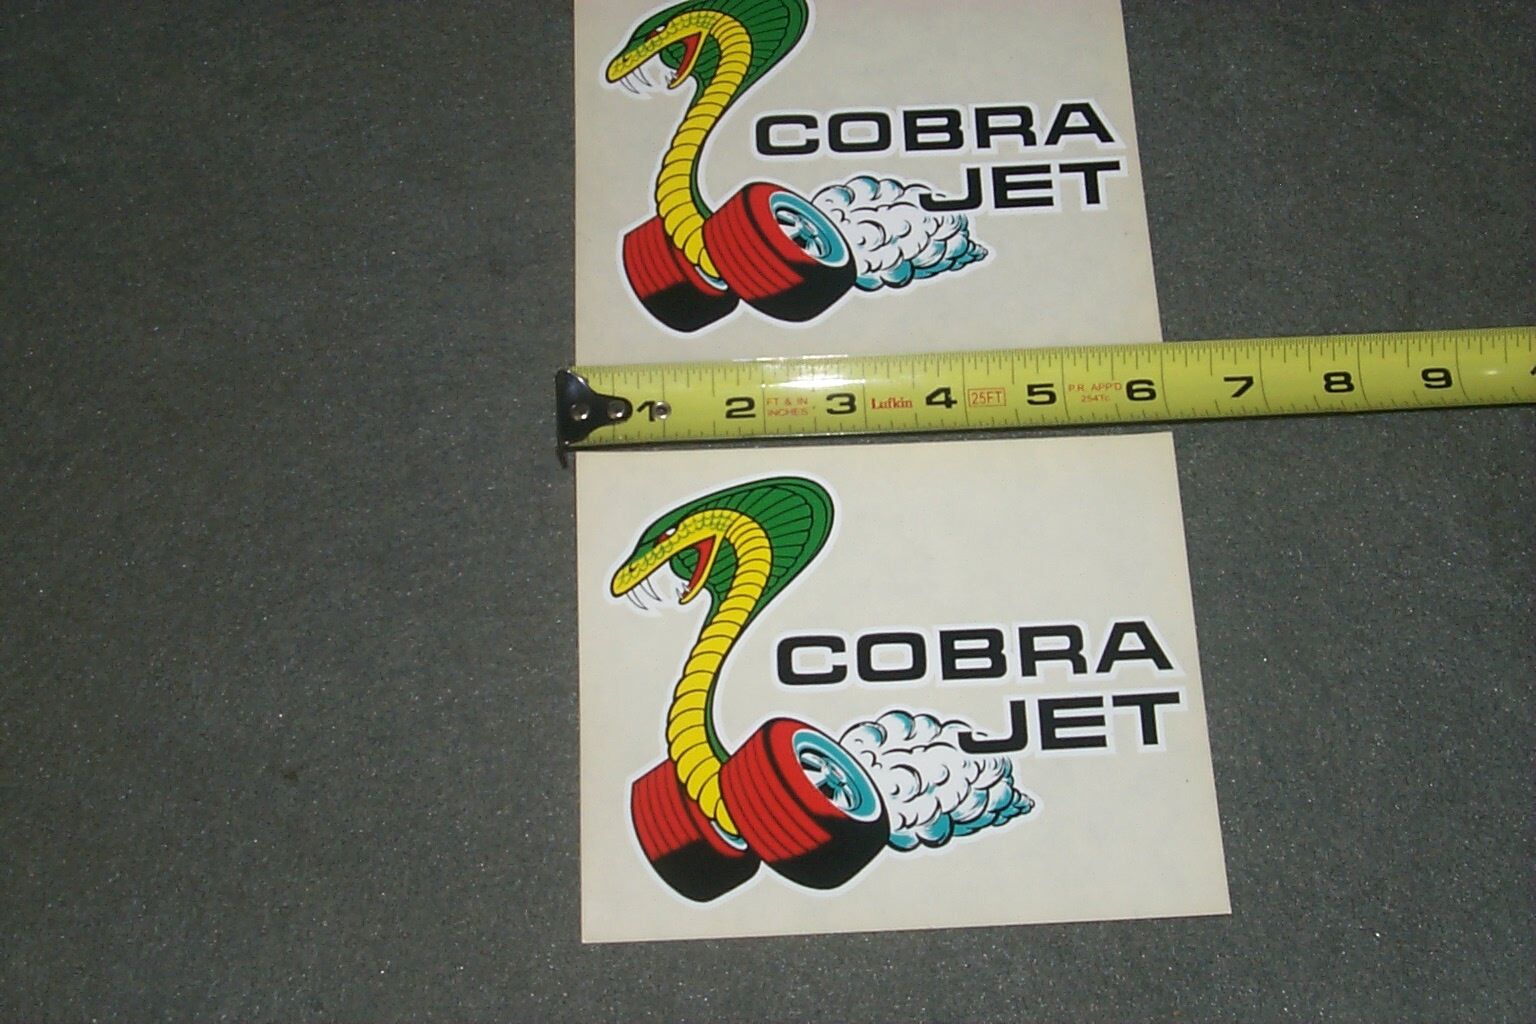 2 NOS Cobra Jet Decals 69 70 Mustang Fastback/Convertible Mach 1 Shelby 428 SCJ